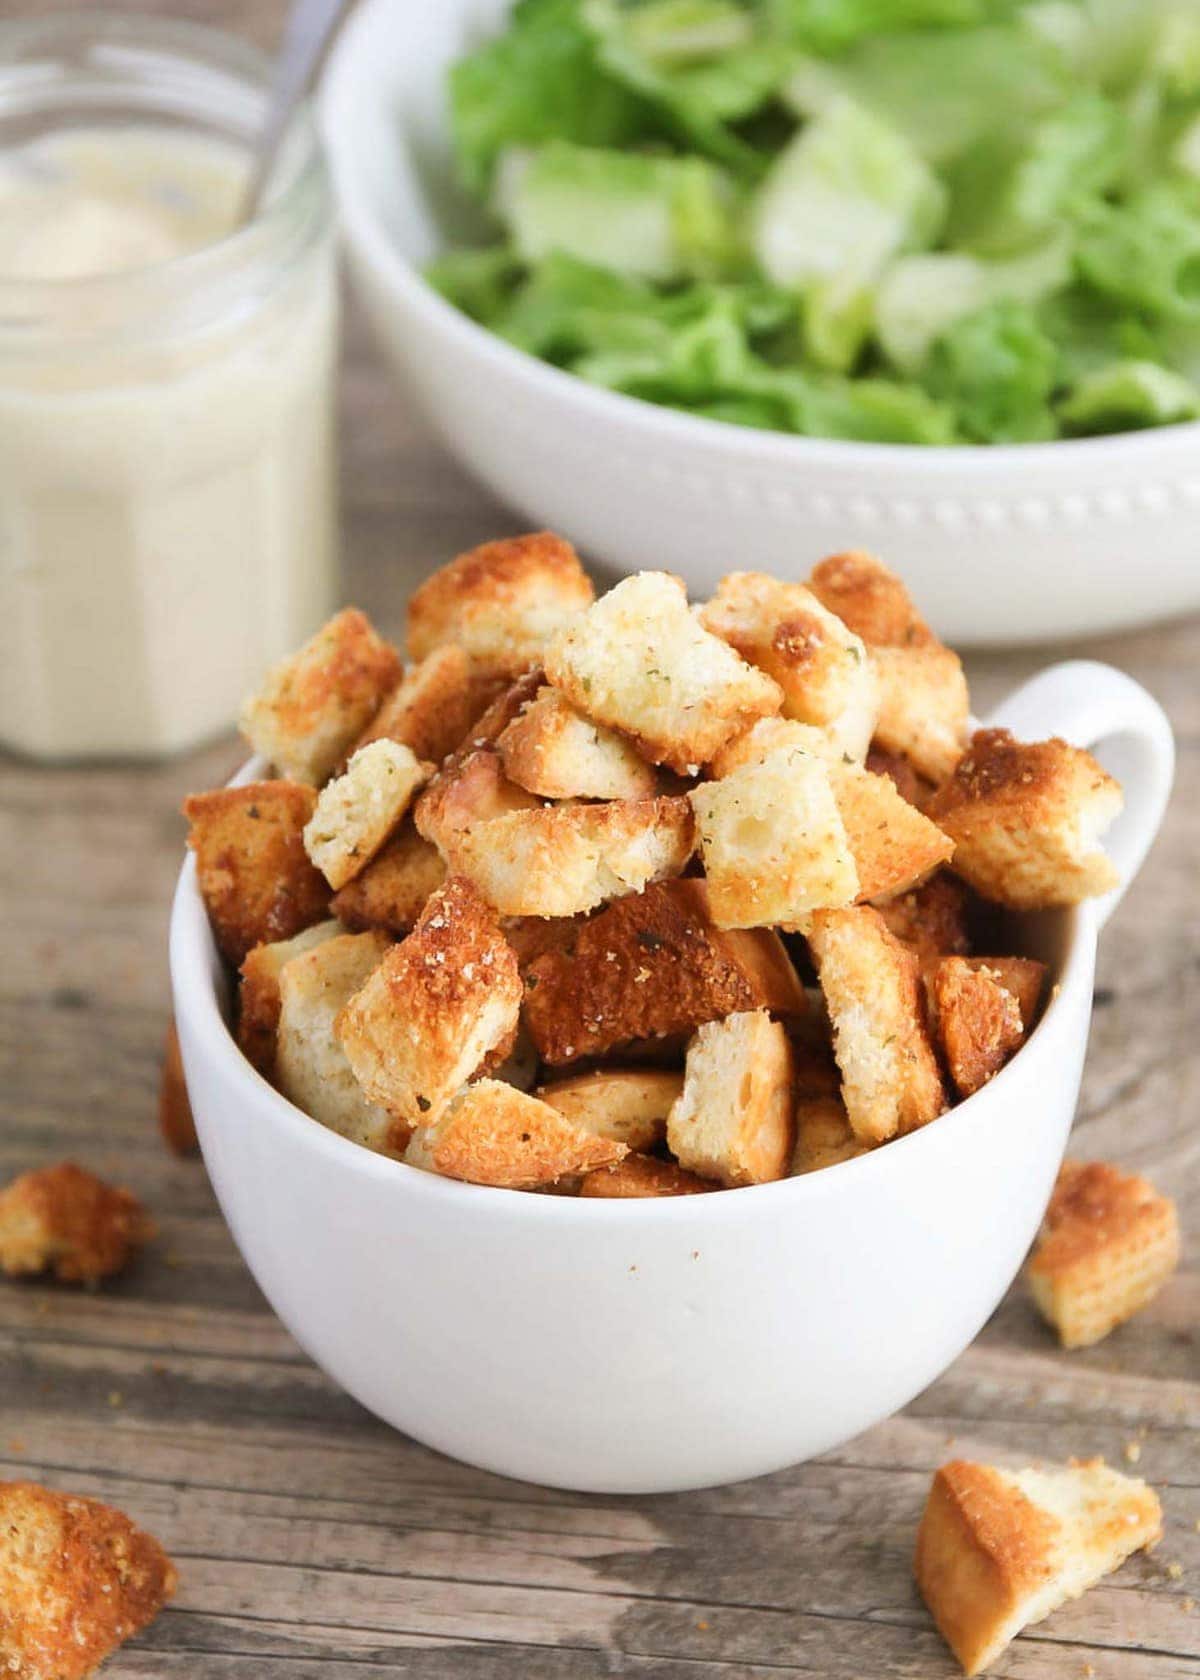 Homemade Croutons served in a white bowl next to a salad.